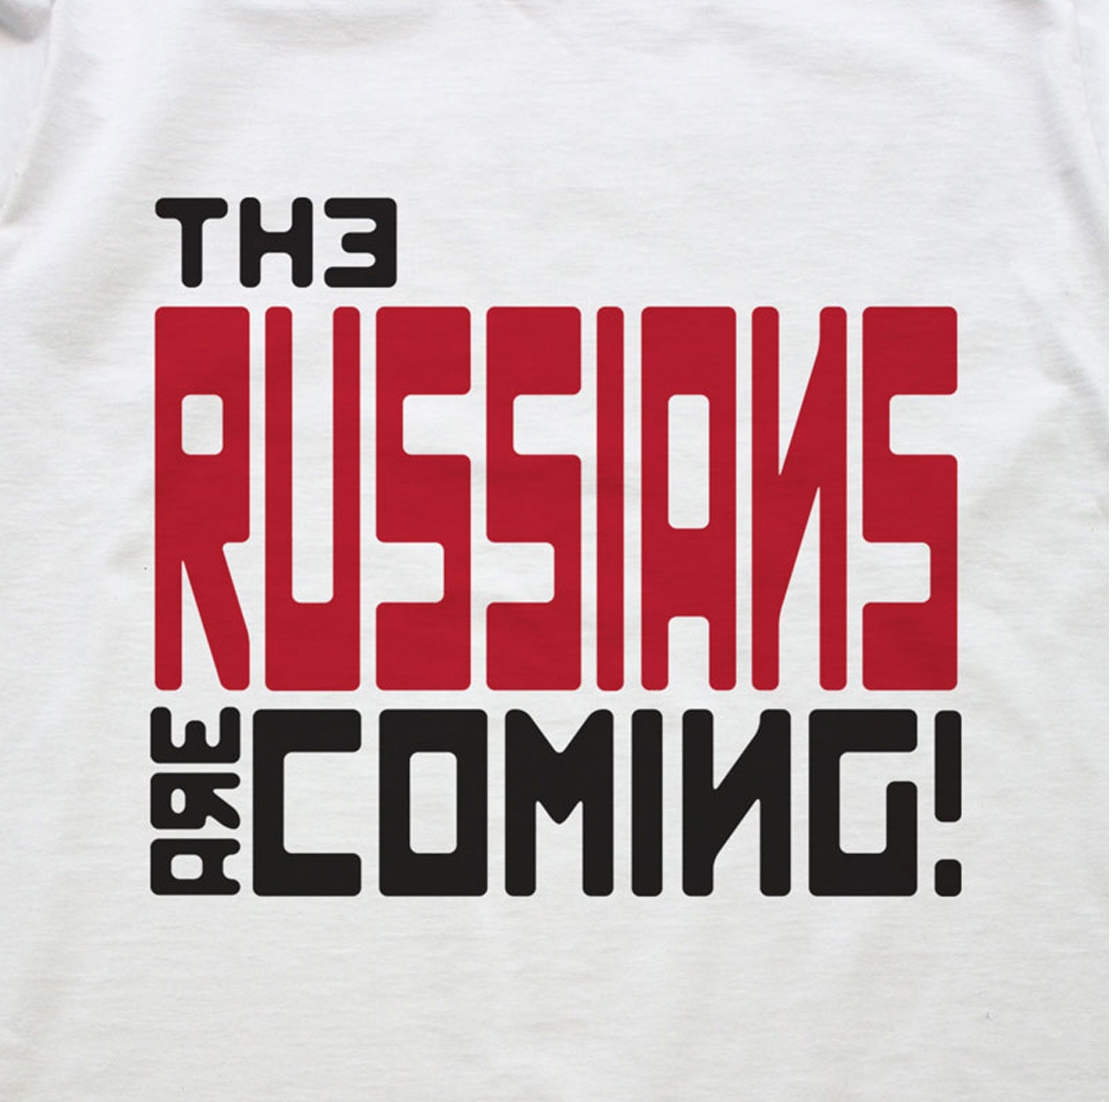 Ис раша. Russia is down Forever. Russians are coming Данко. Russians are coming группа. Картинка i am from Russia.